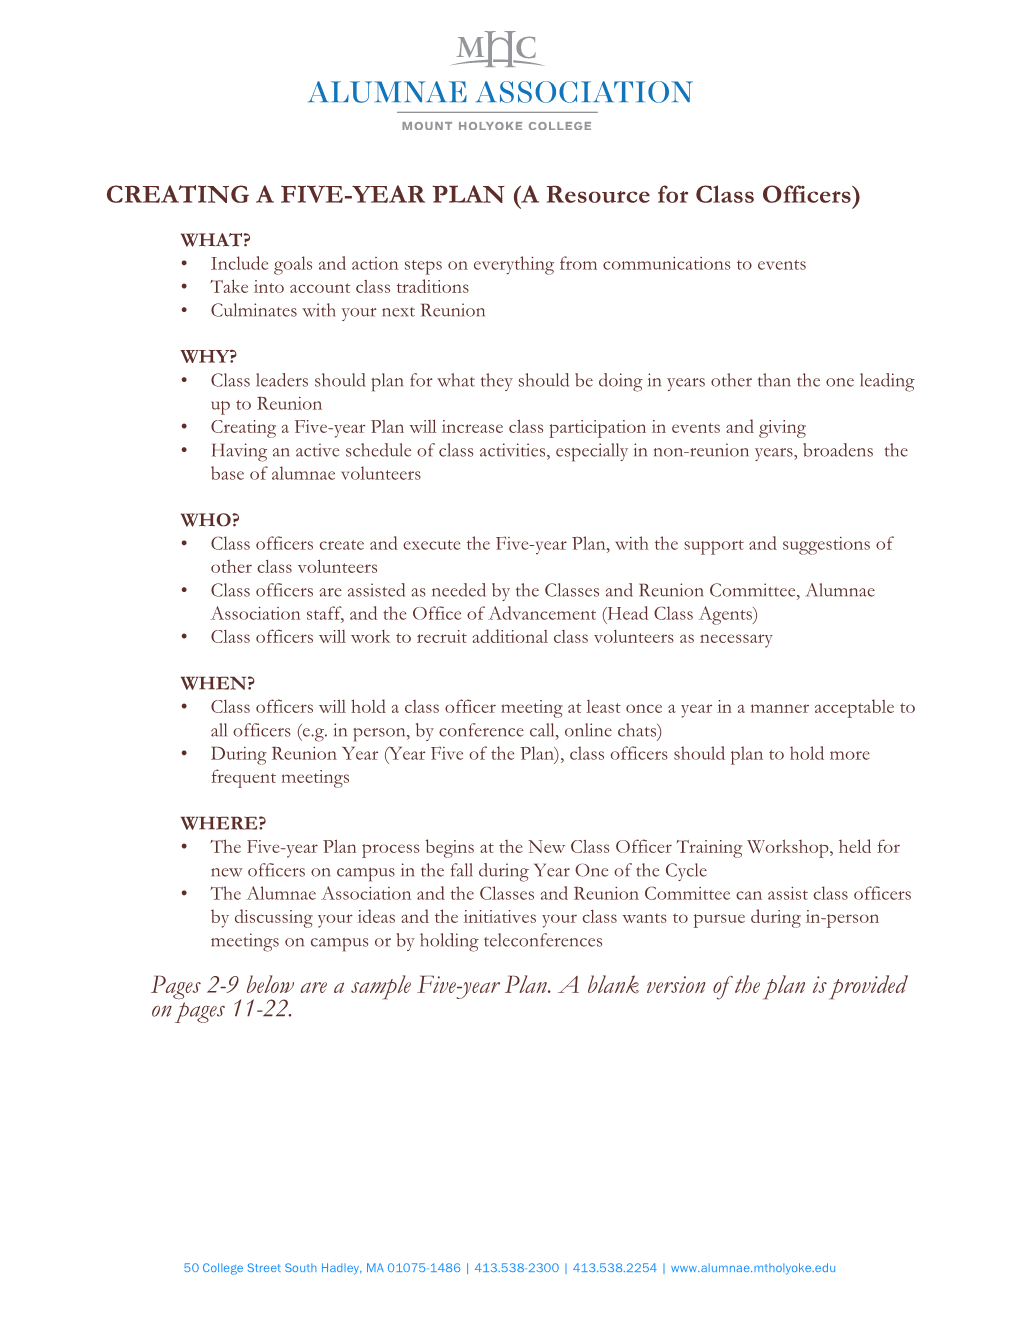 FIVE-YEAR PLAN (A Resource for Class Officers)